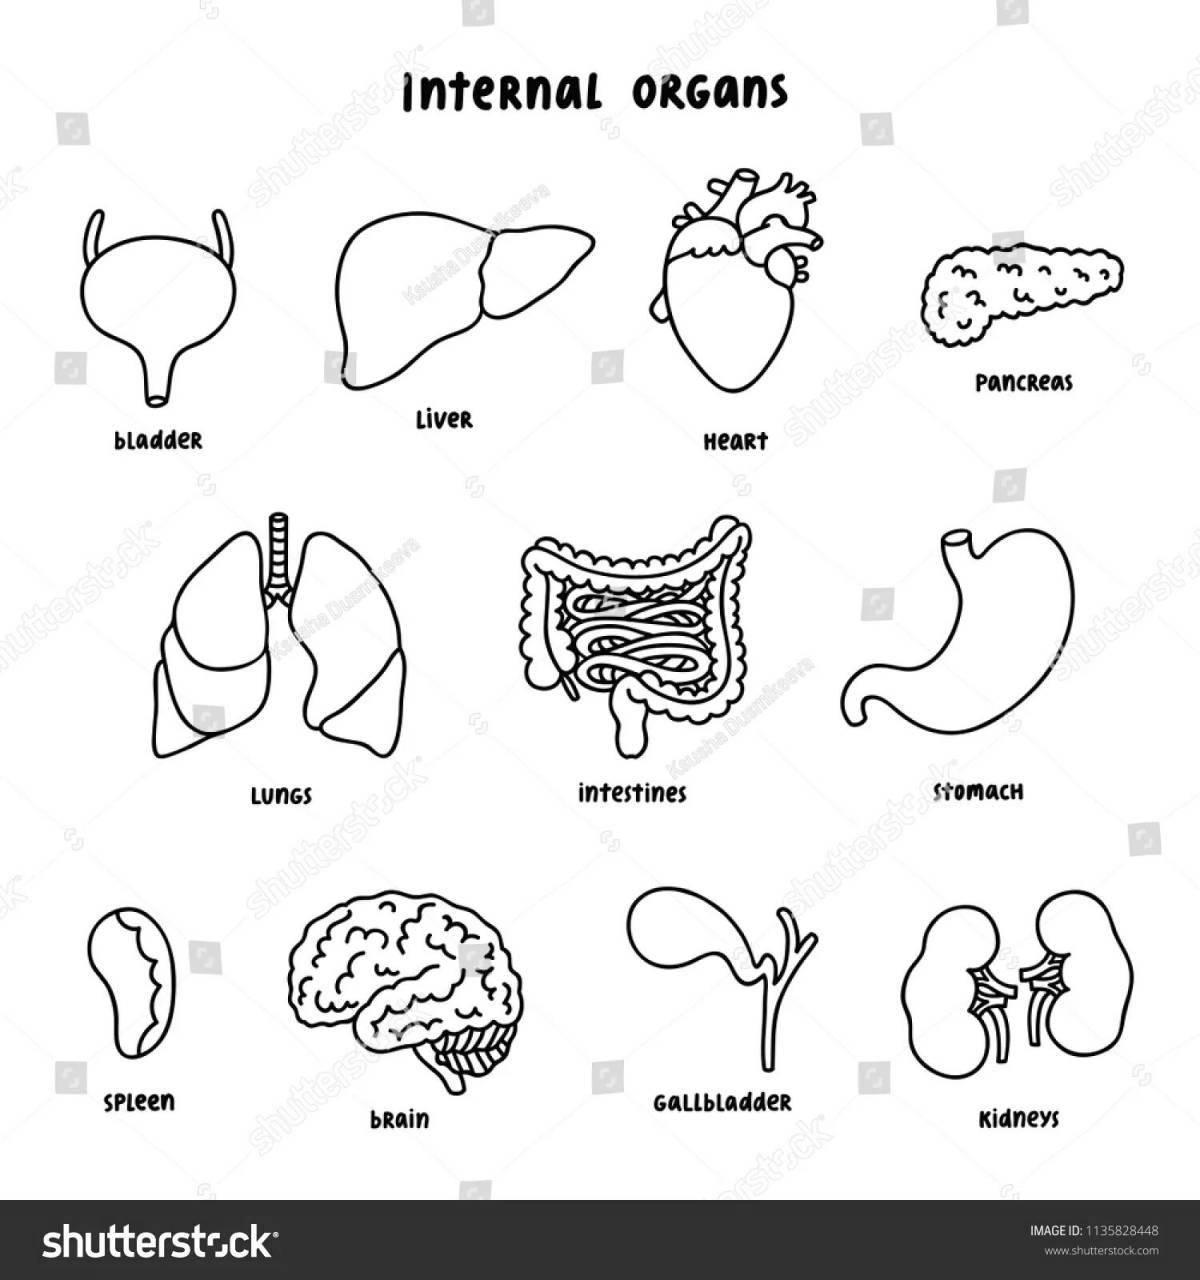 Fun coloring of the human body with internal organs